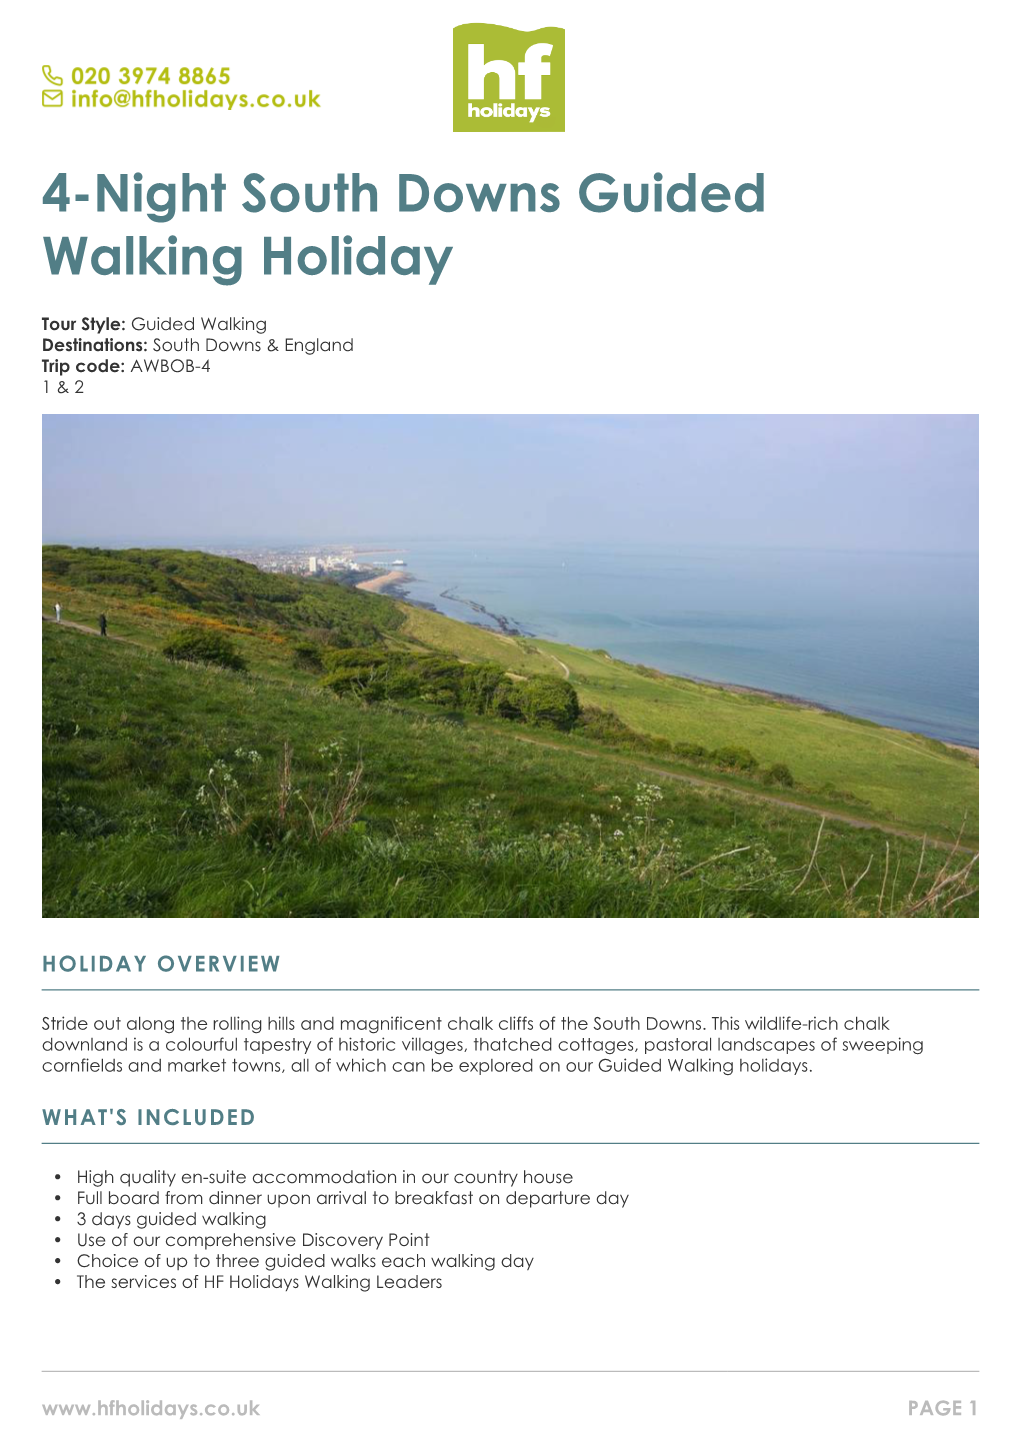 4-Night South Downs Guided Walking Holiday